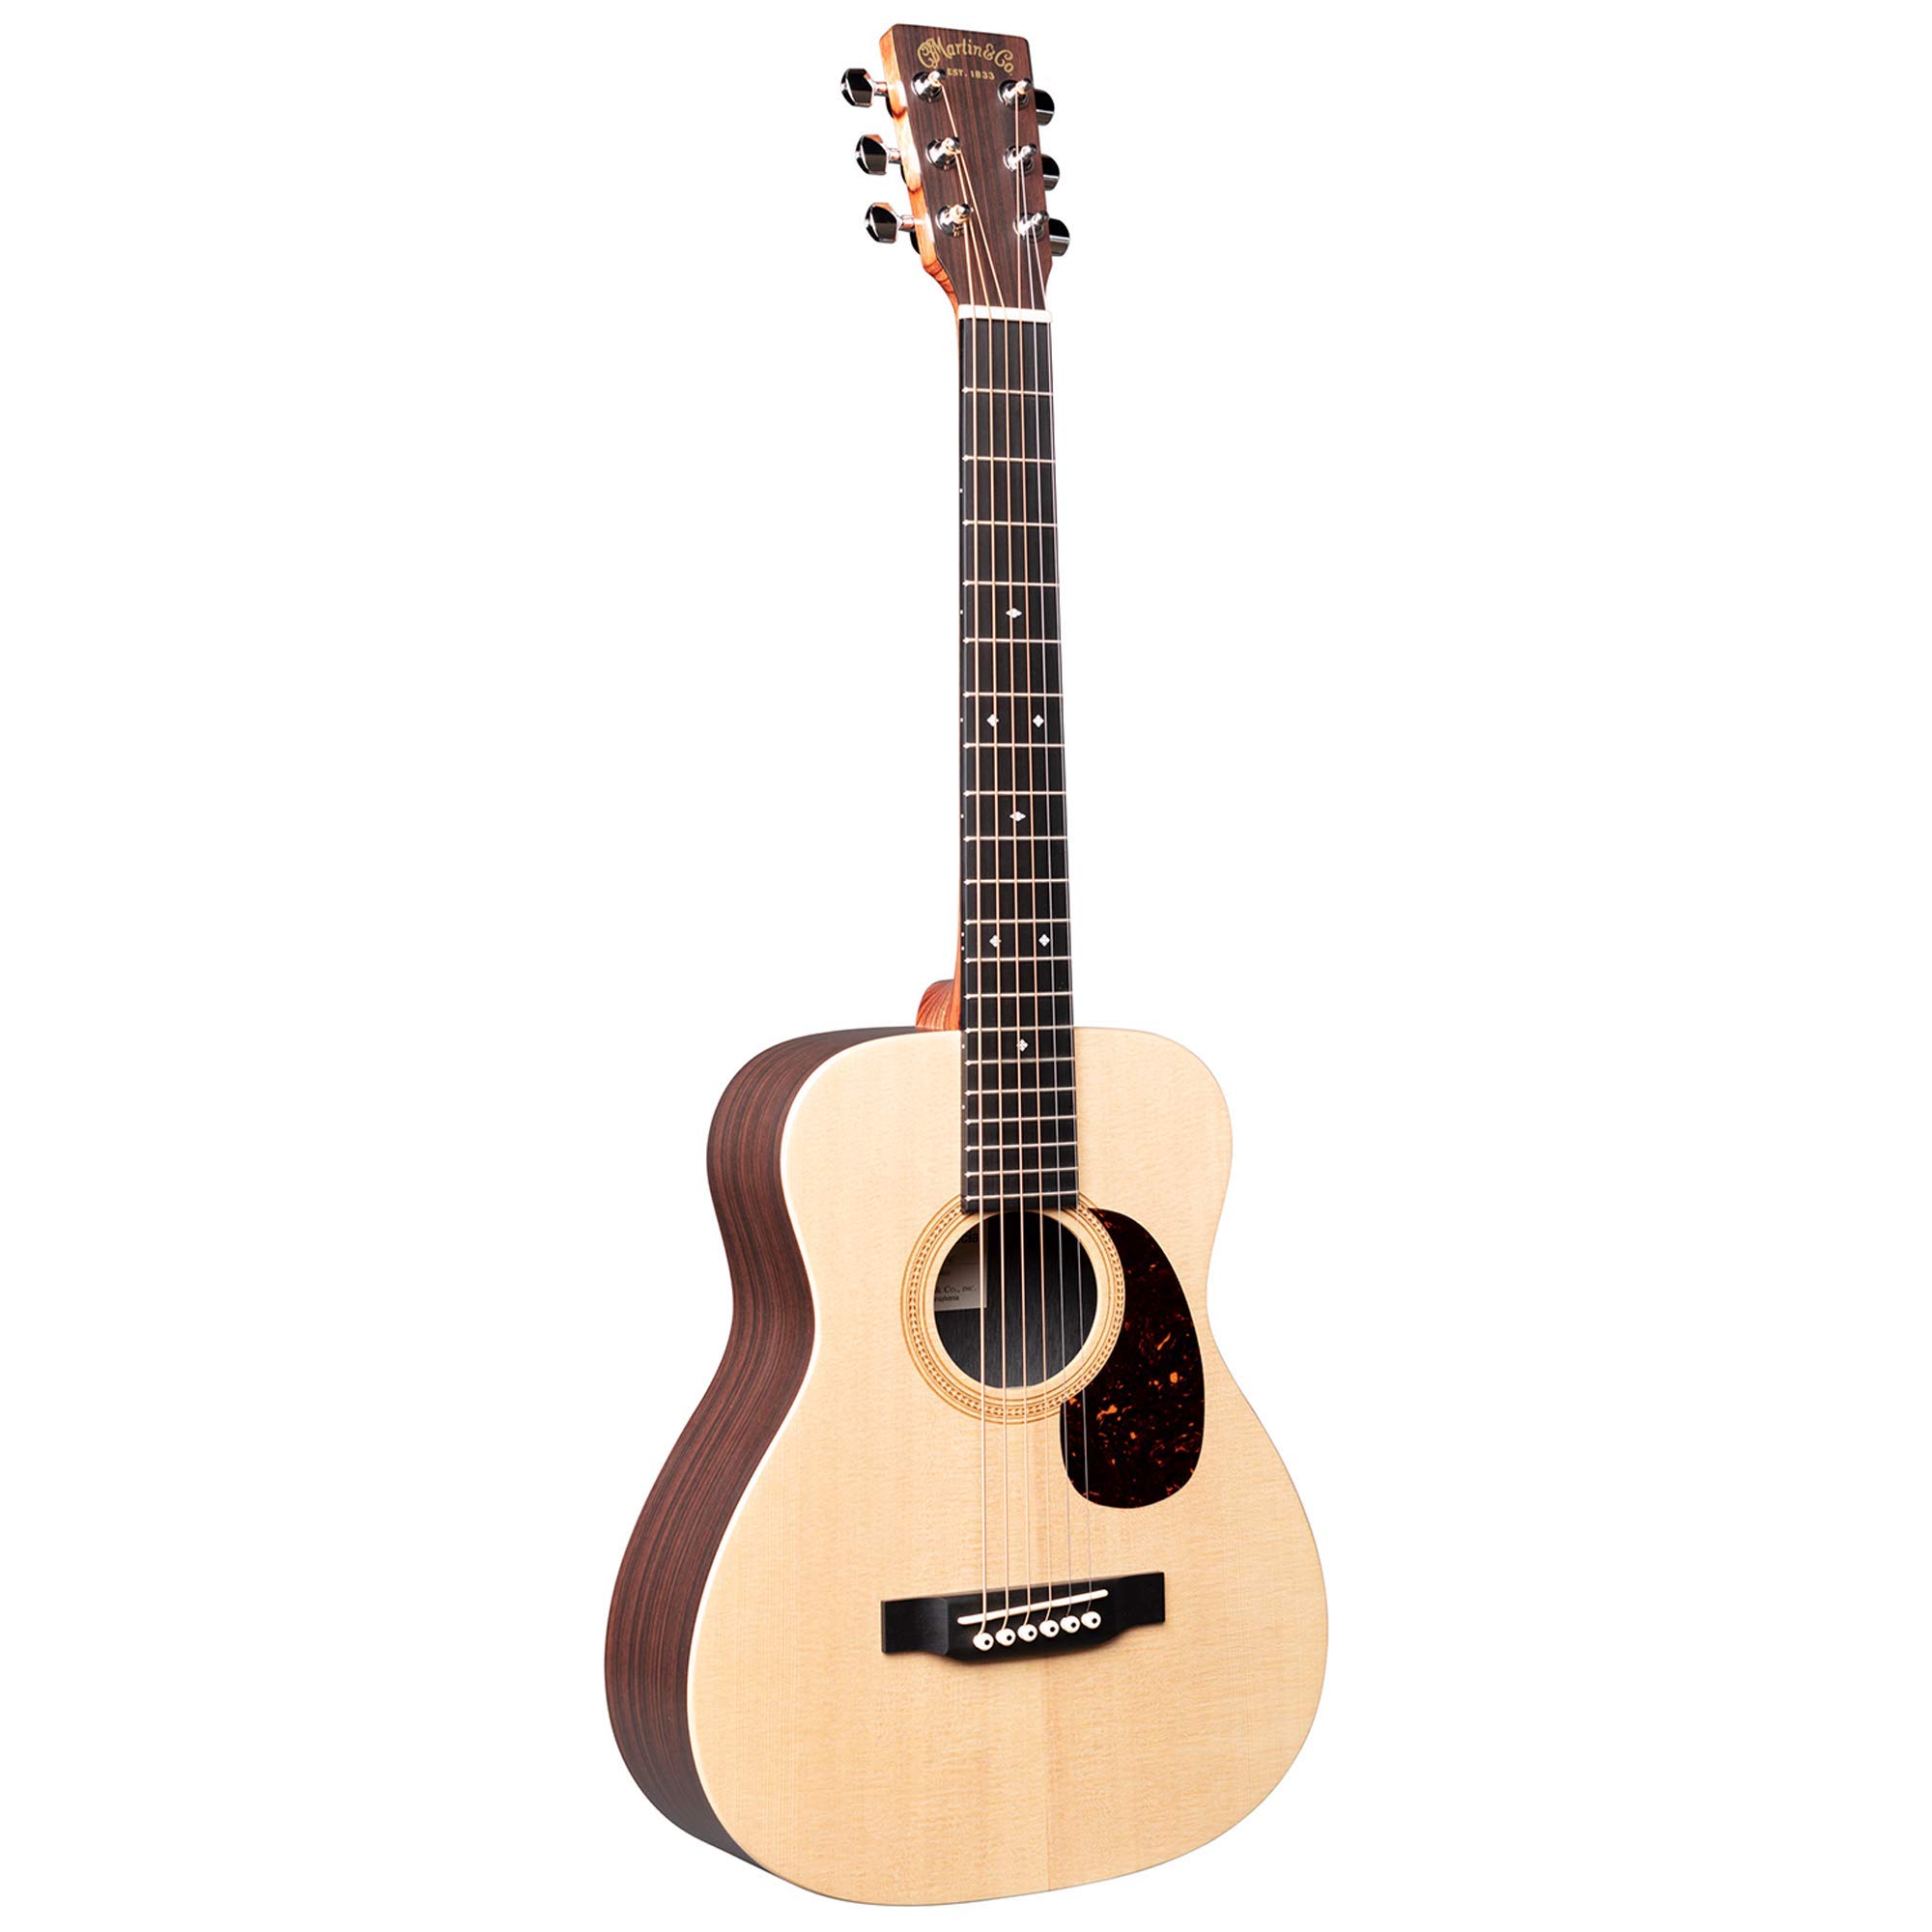 Little Martin LX1R Acoustic Guitar with Gig Bag, Sitka Spruce and Rosewood Pattern HPL Construction, Modified 0-14 Fret, Modified Low Oval Neck Shape